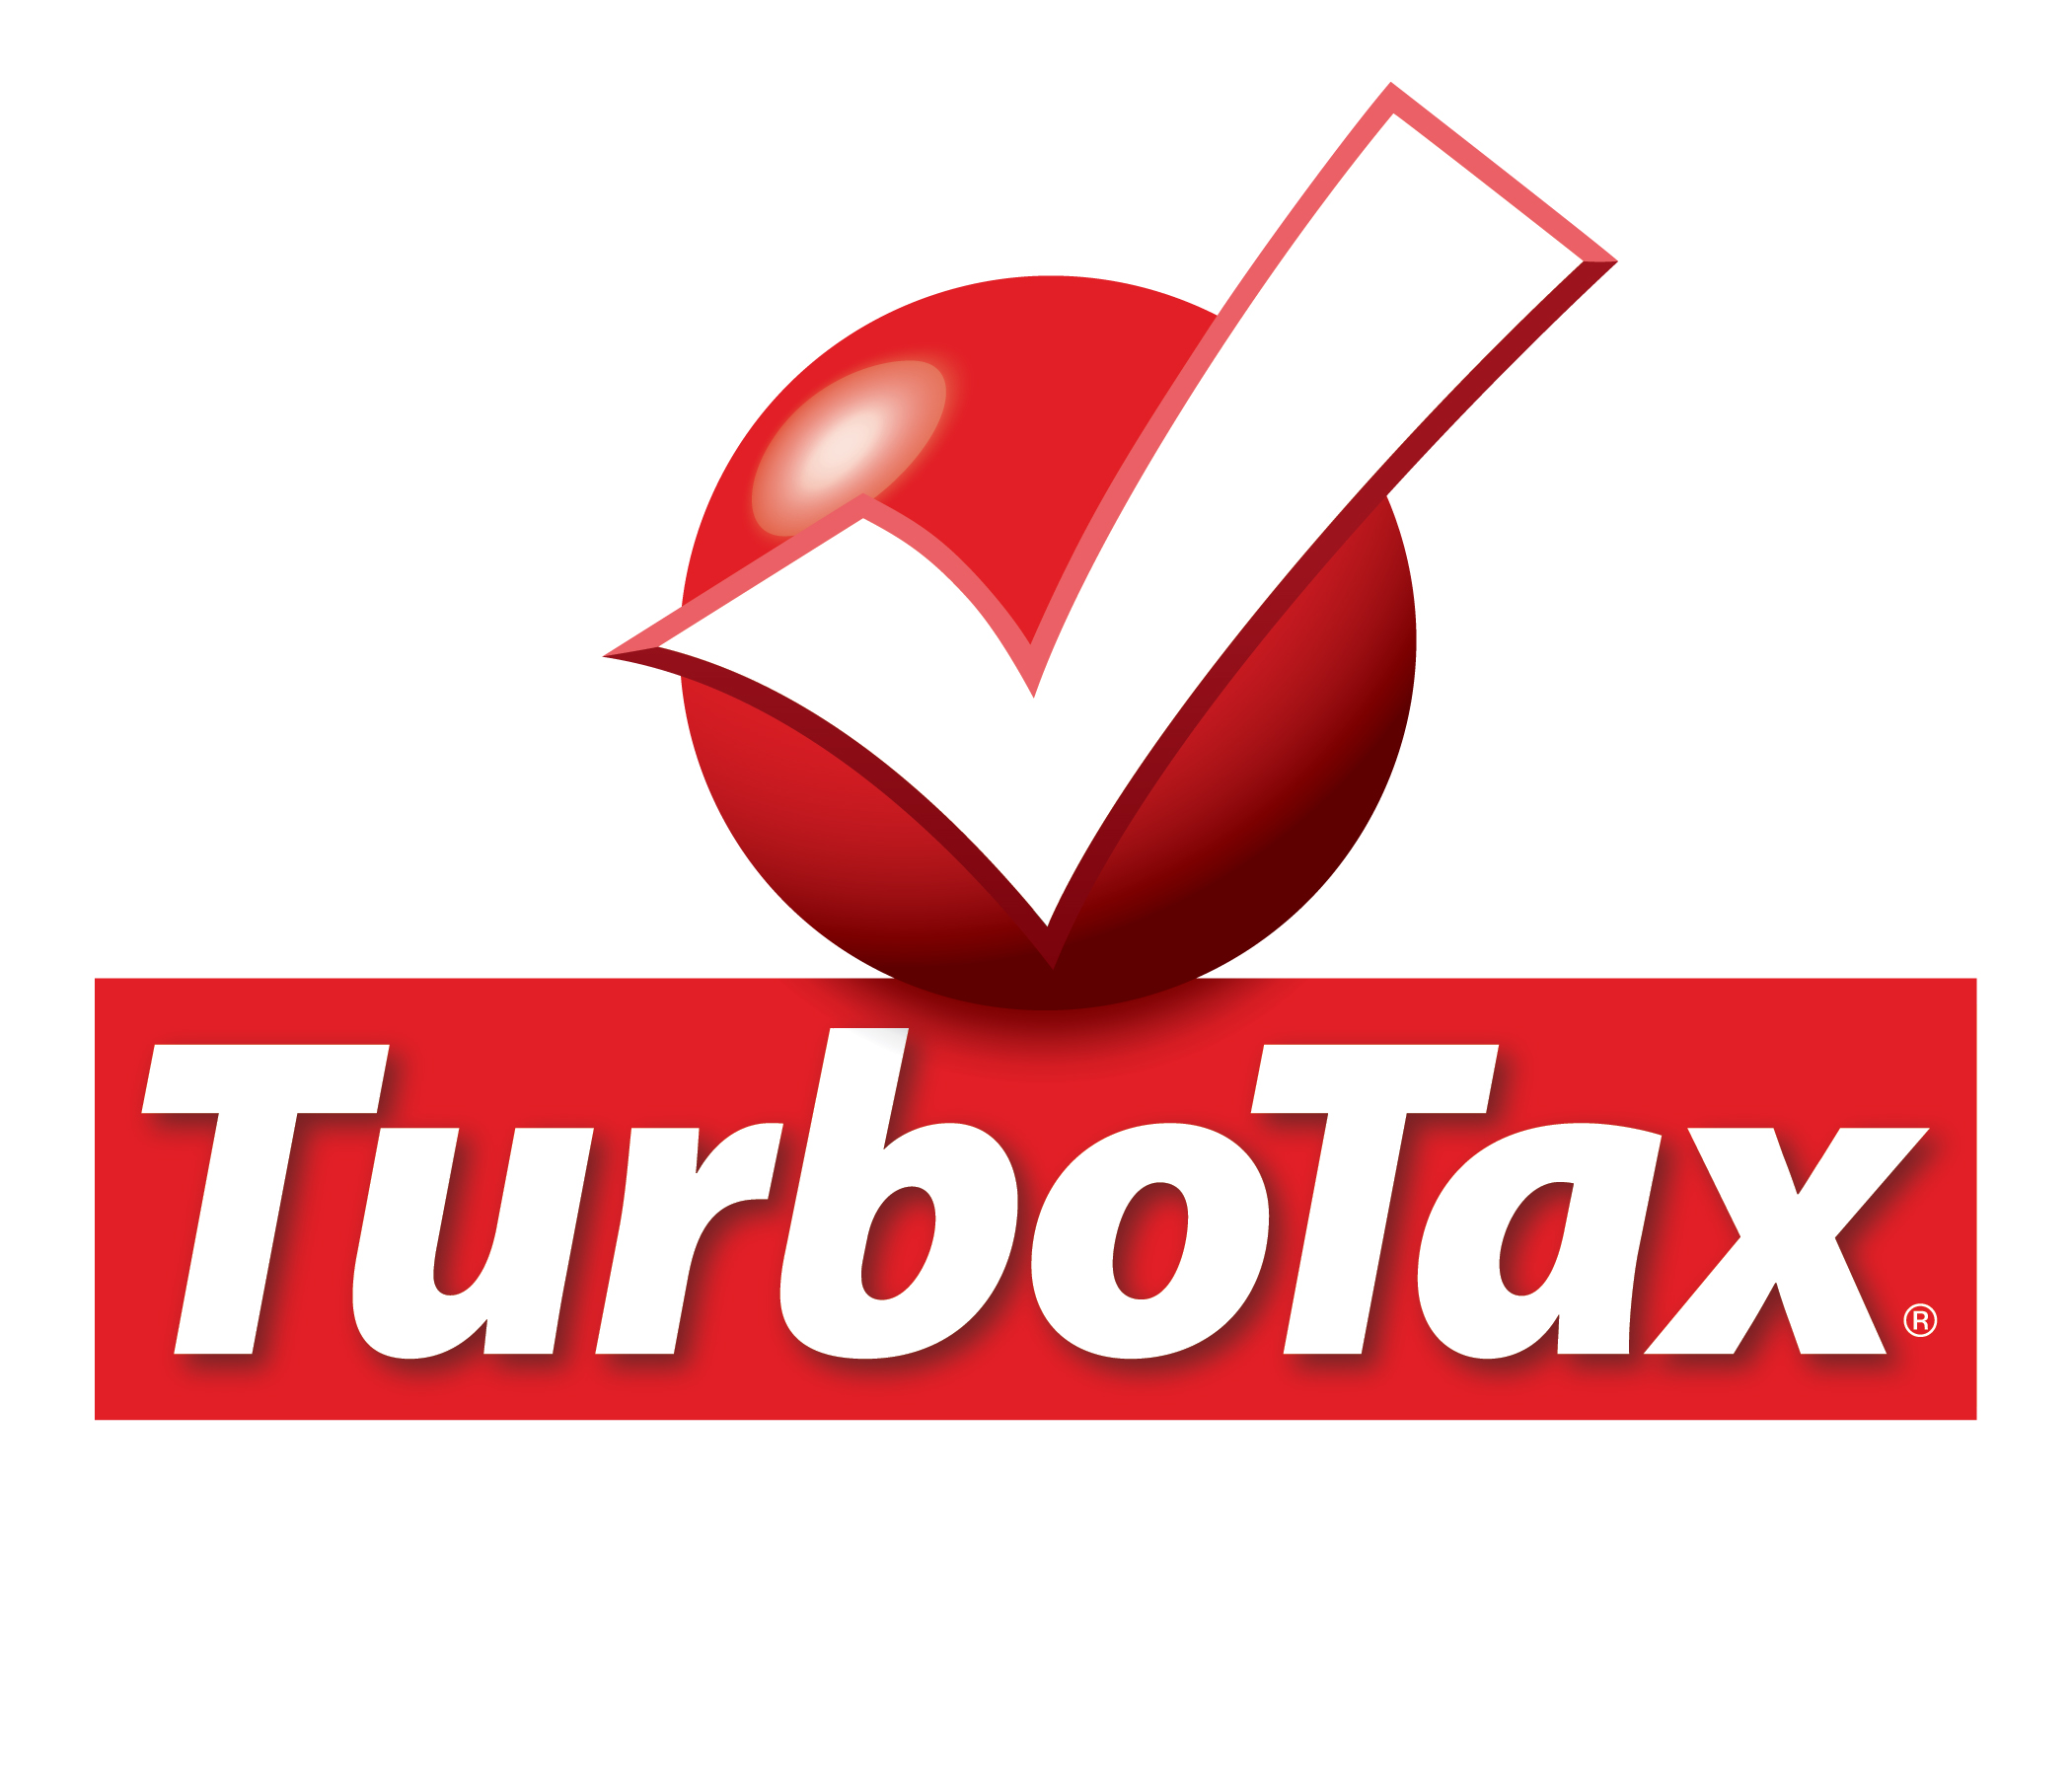 How to Set Up TurboTax in Simple steps?